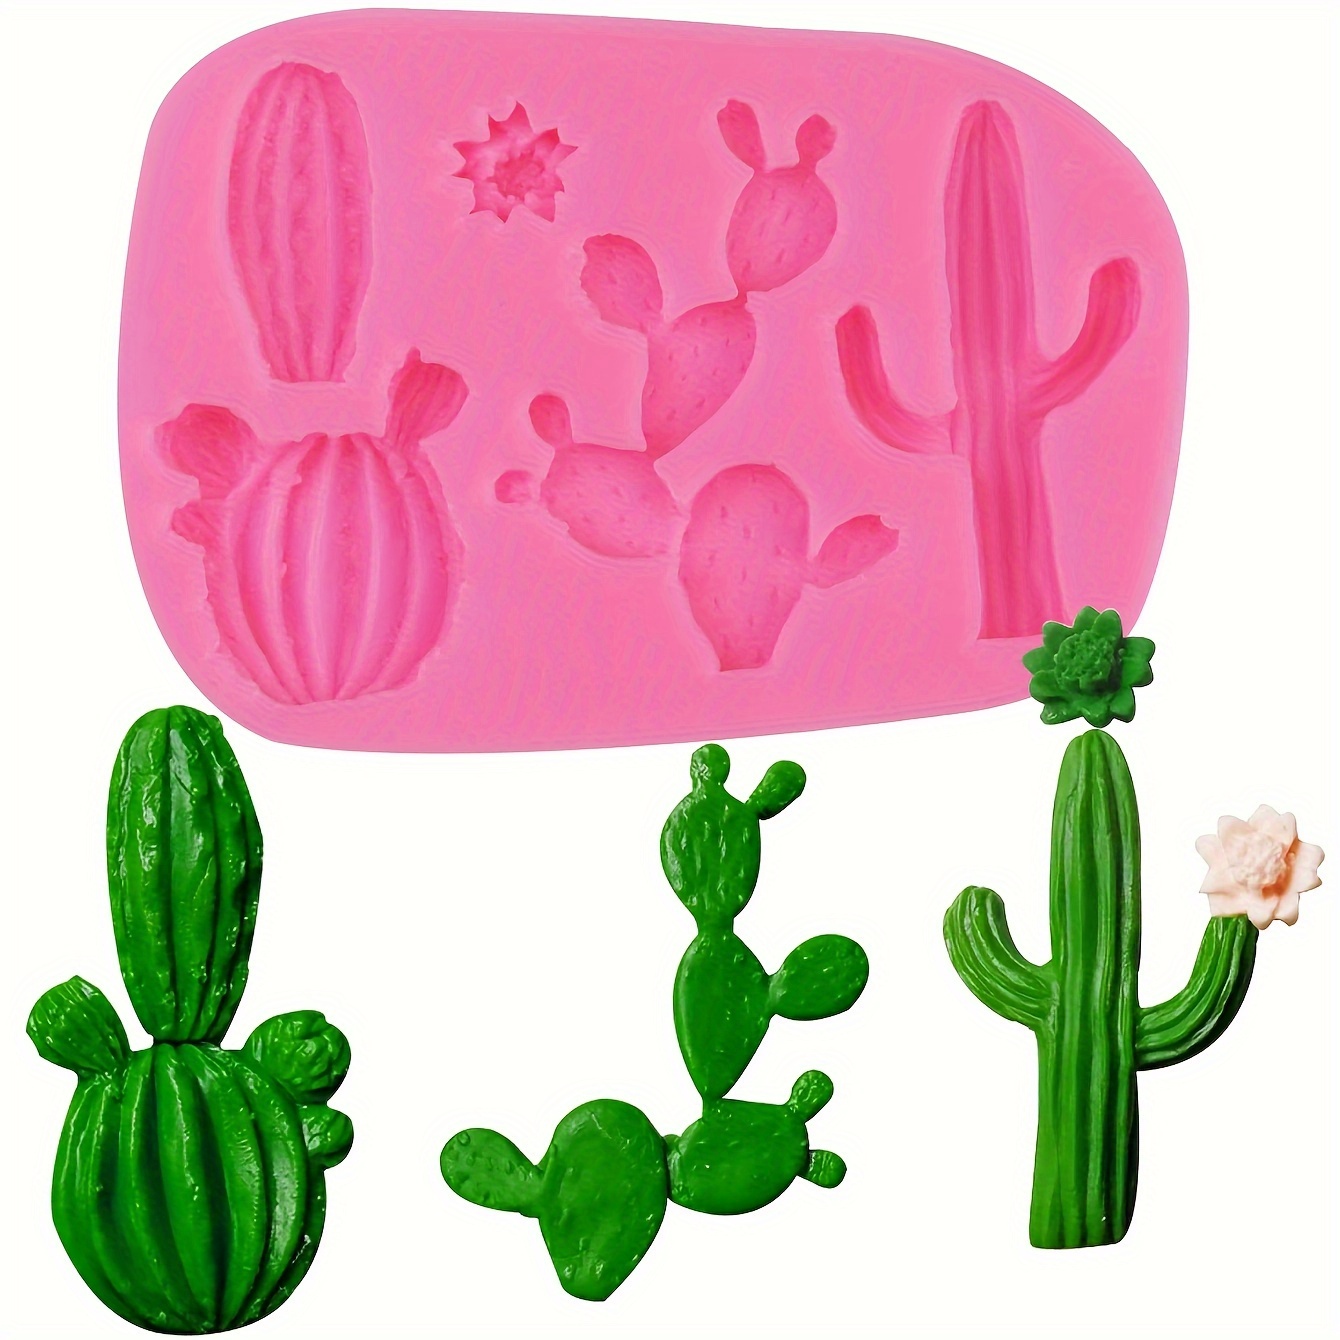 JDEFEG Cactus Candy Melt Molds Valentine's Cake Baking Day Chocolate Tool  Silicone Love Diy Cake Mould Baking Pans with Lids for Oven Silica Gel Pink  